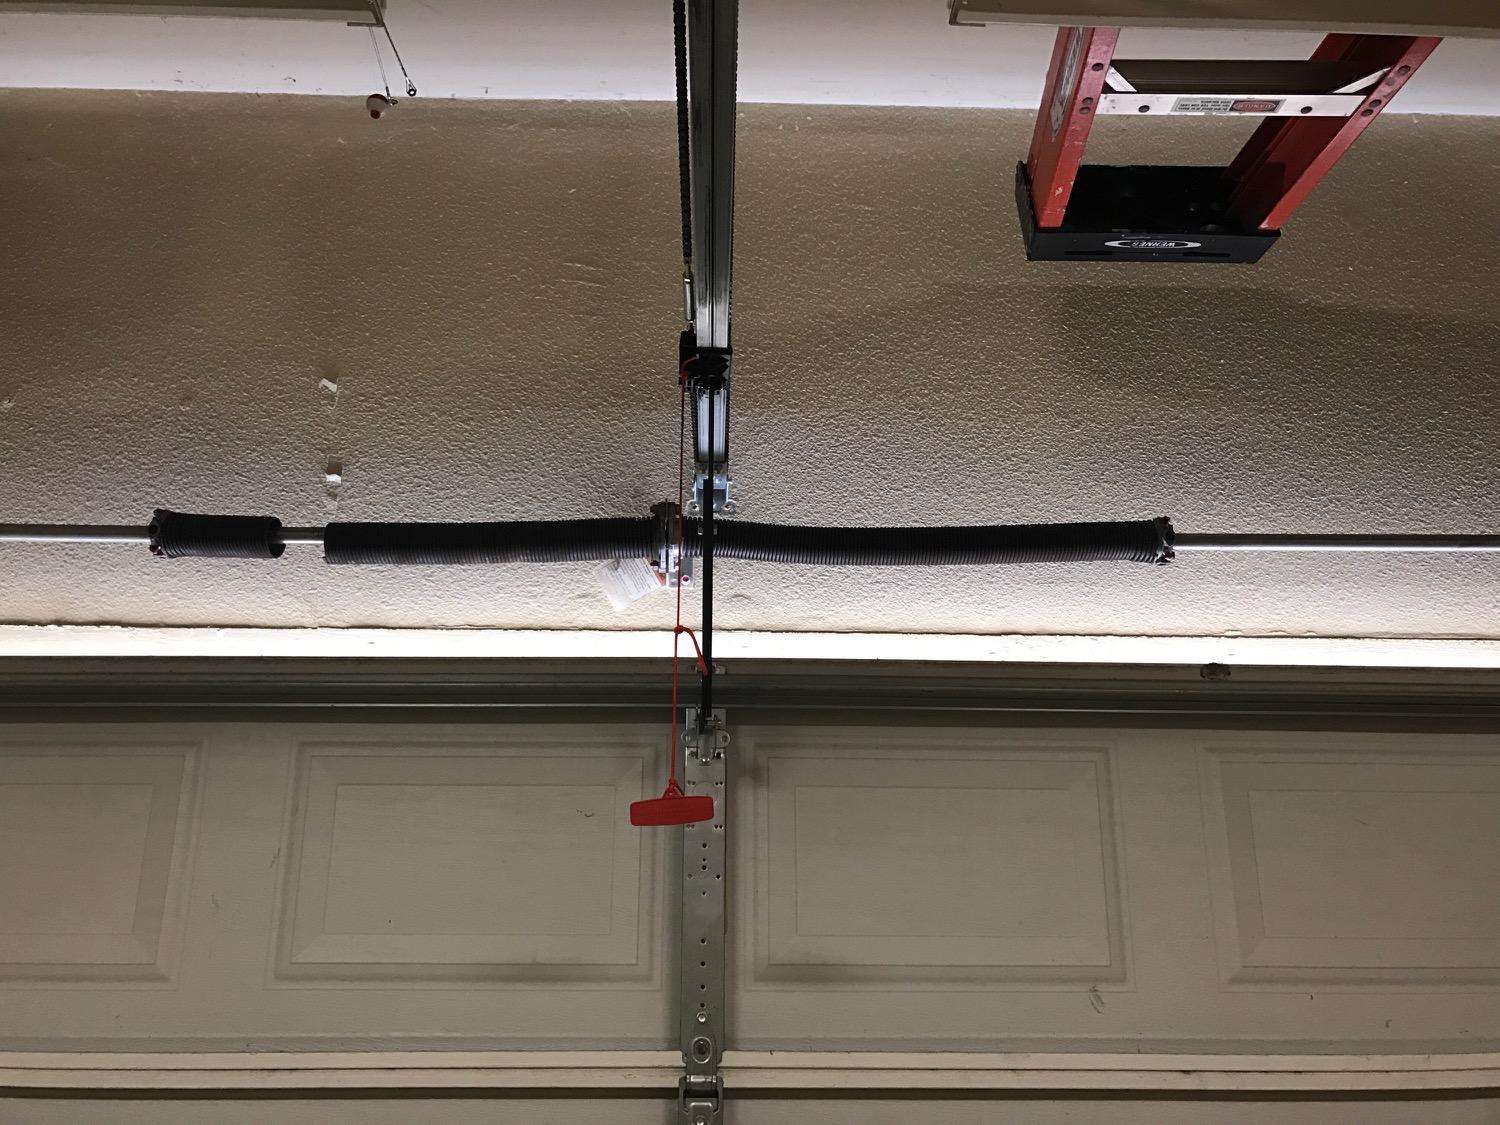 Broken spring on garage door. Photo was sent by customer which makes it very easy to quote by text message.